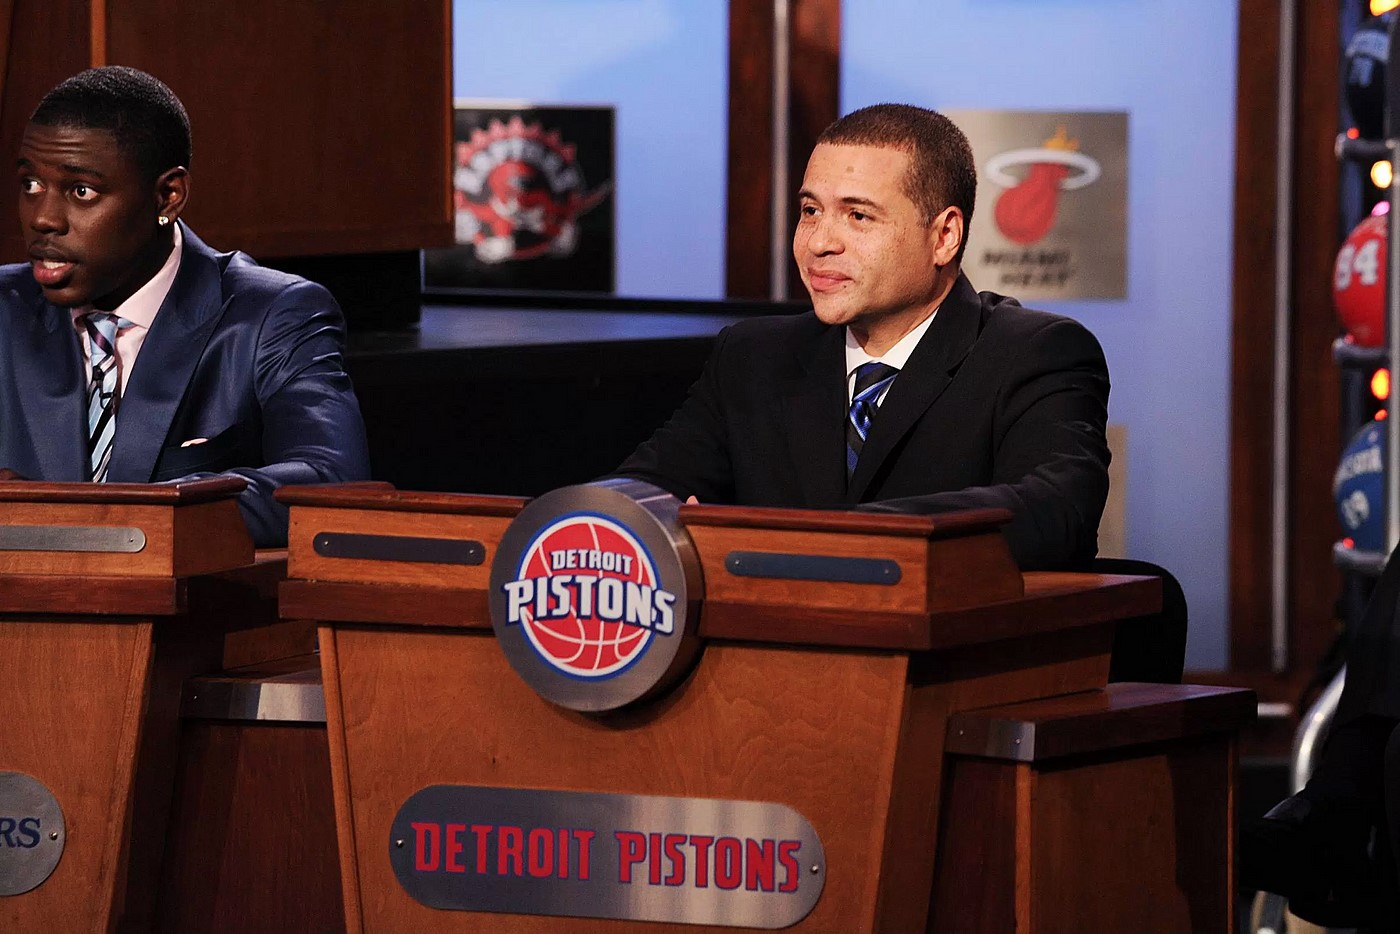 Detroit-Native Scott Perry Should Be the Pistons’ New Head of Basketball Operations